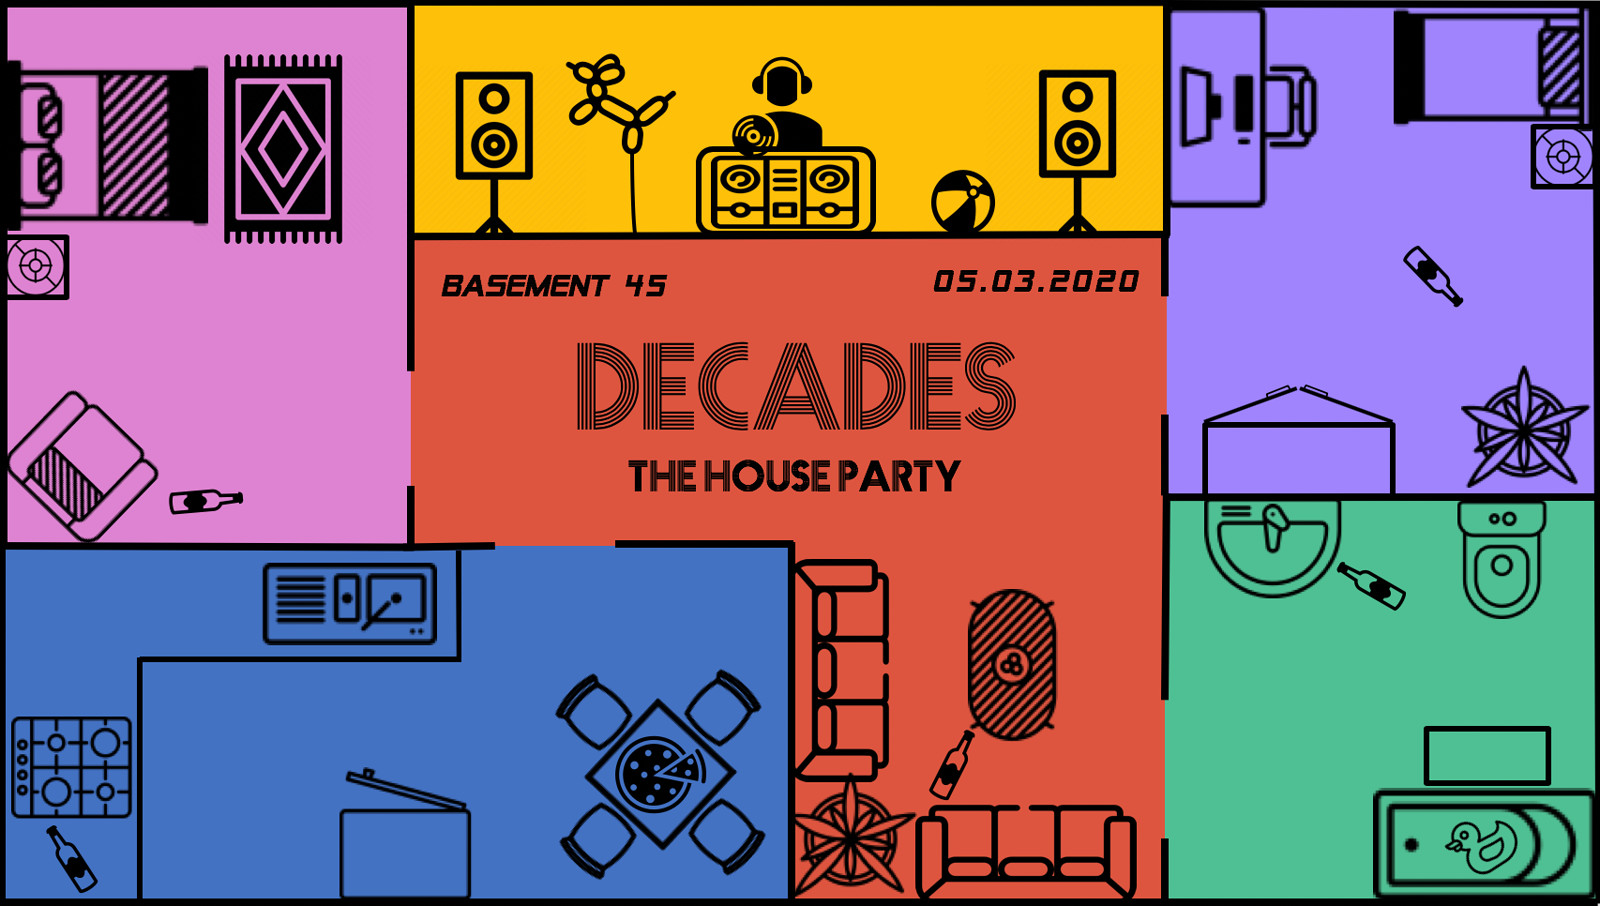 Decades Presents: THE HOUSE PARTY at Basement 45